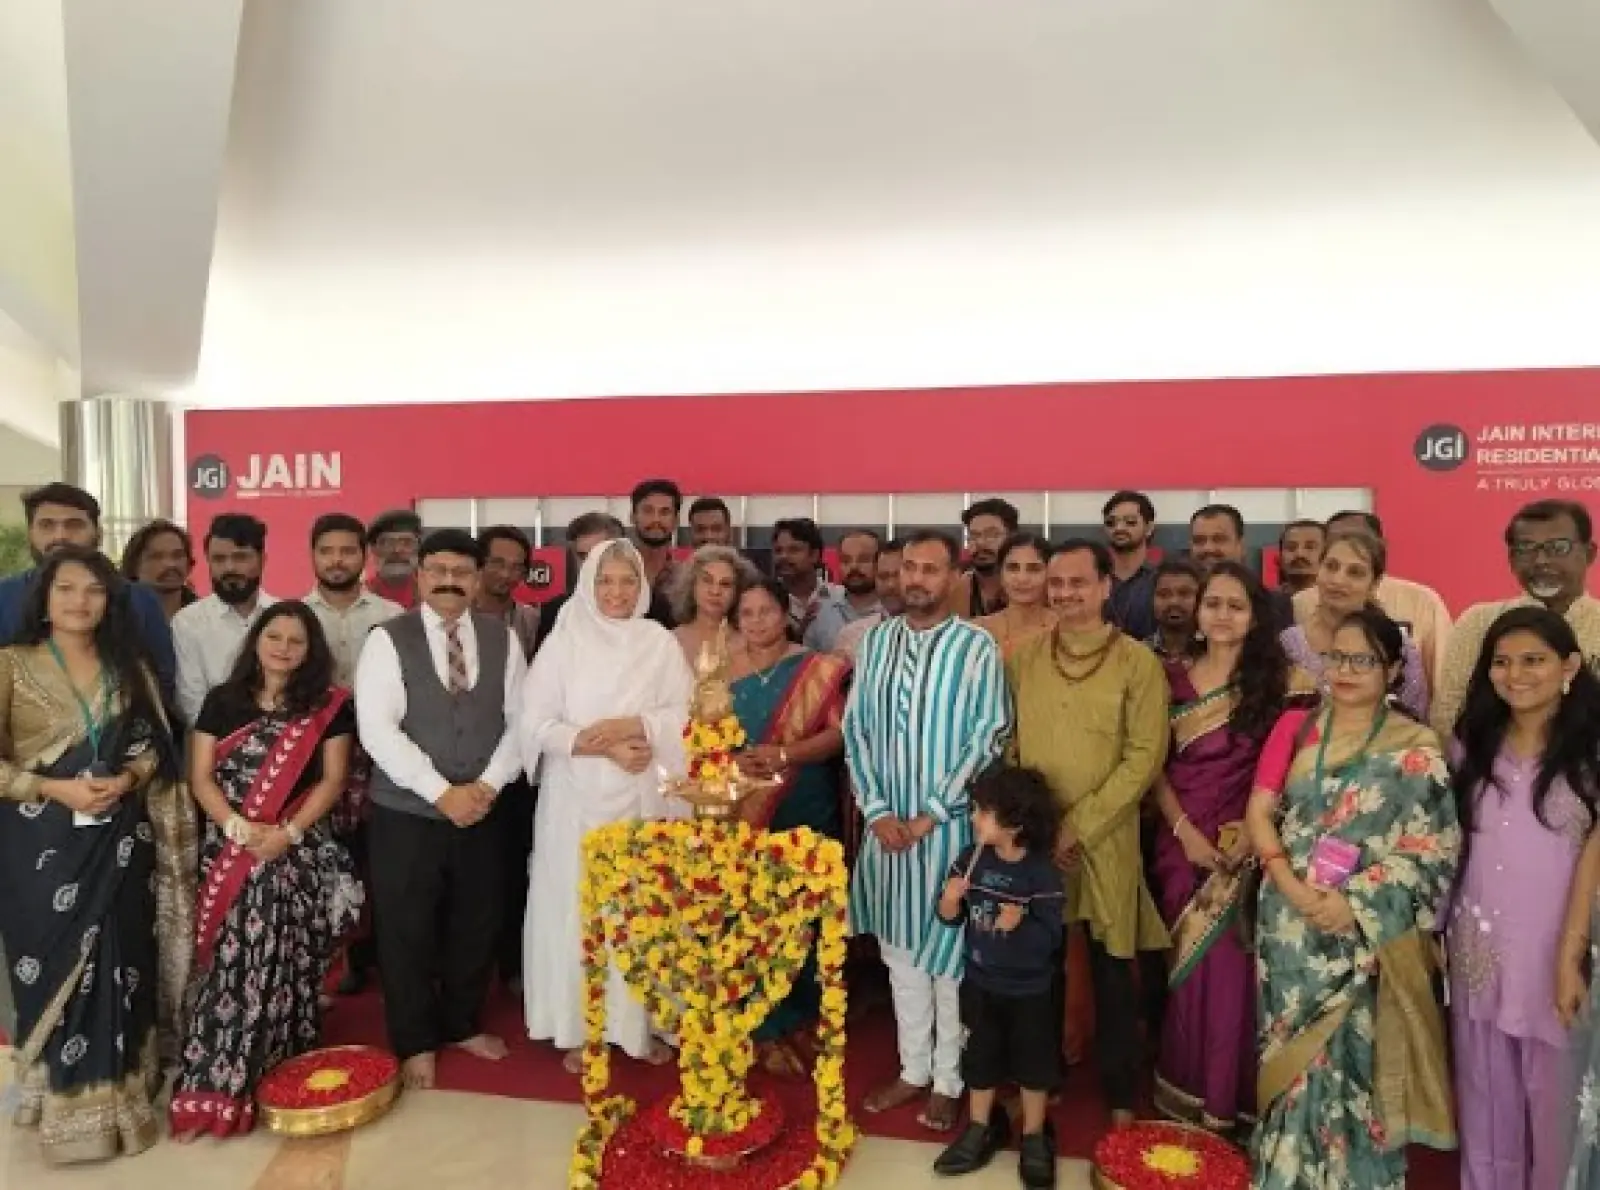 Parshv P'adap, a Stone Carving and Sentimental Painting Camp by JAIN Shantamani Kala Kendra, Concludes with Great Fanfare